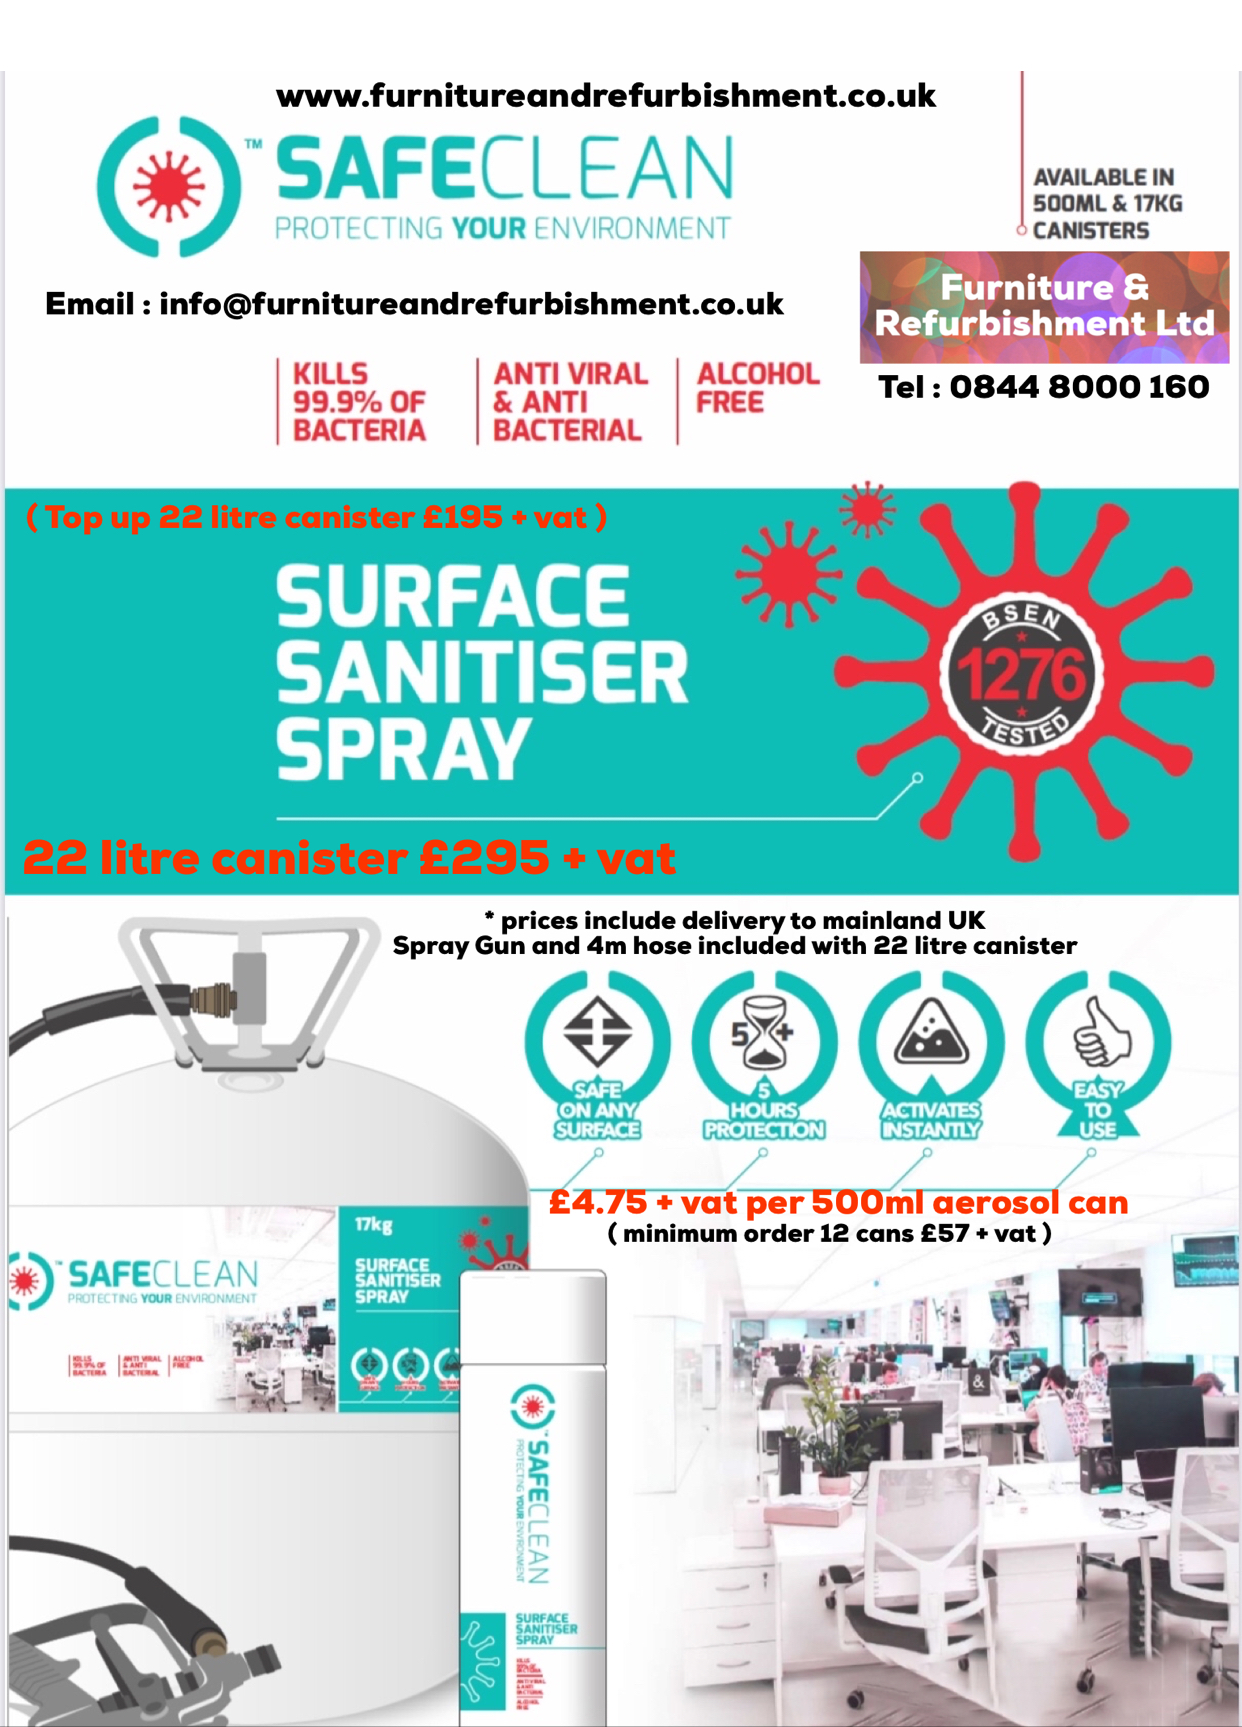 Anti Viral Anti Bacterial Surface Sanitiser Canister 22 litres complete with spray gun and 4 metre hose , safe to use on any surface 